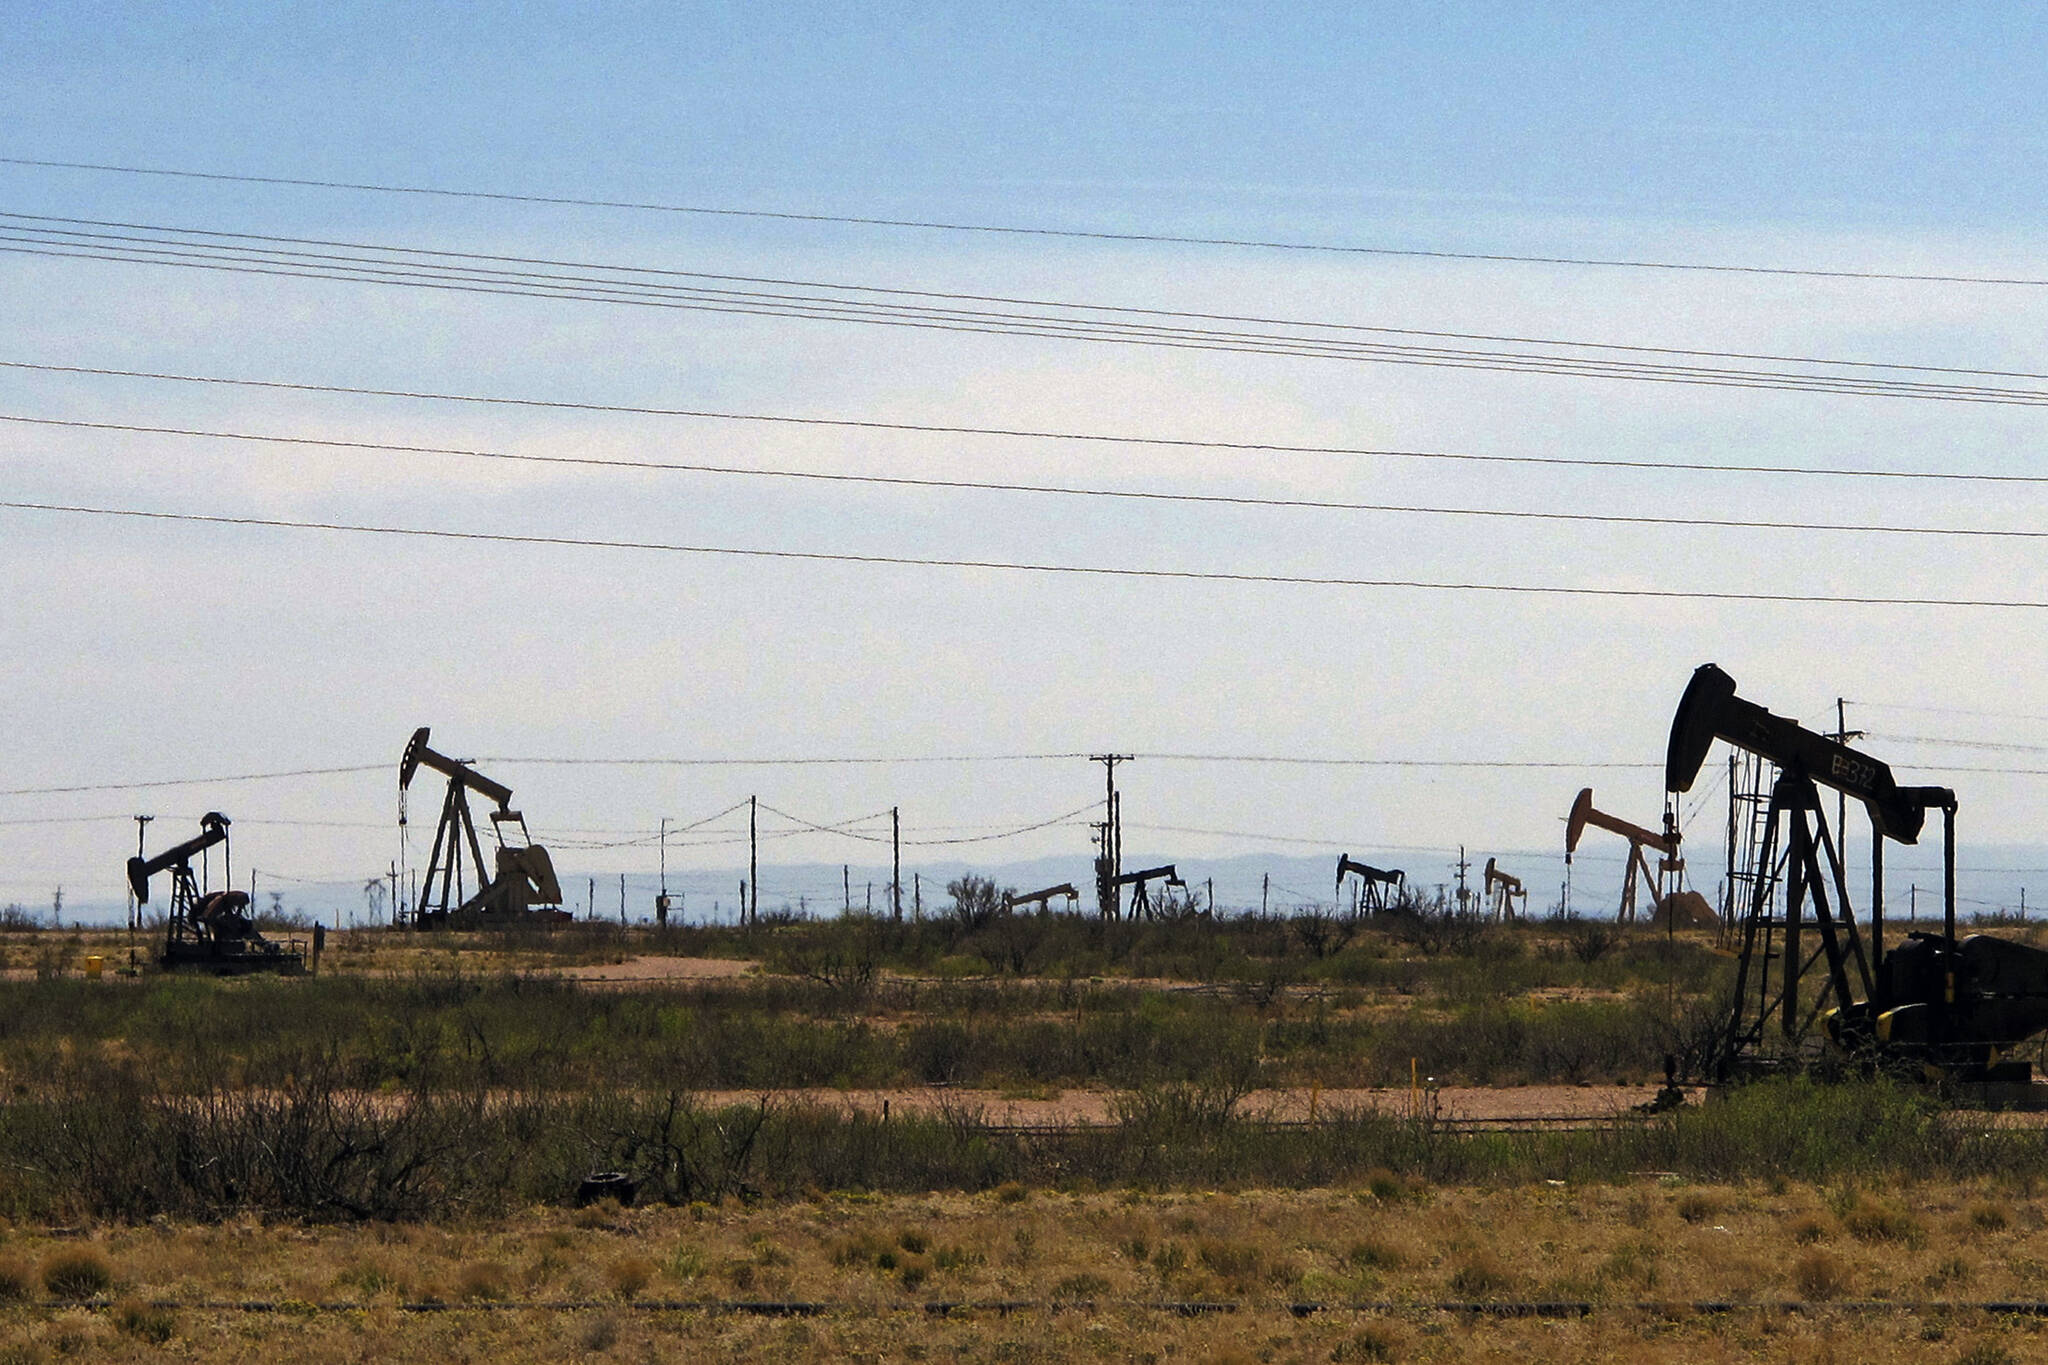 Oil rigs stand in the Loco Hills field along U.S. Highway 82 in Eddy County, near Artesia, N.M., one of the most active regions of the Permian Basin. Government budgets are booming in New Mexico. The reason behind the spending spree — oil. New Mexico is the No. 2 crude oil producer among U.S. states and the top recipient of U.S. disbursements for fossil fuel production on federal land. But a budget flush with petroleum cash has a side effect: It also puts the spotlight on how difficult it is for New Mexico and other states to turn their rhetoric on tackling climate change into reality. (AP Photo / Jeri Clausing)